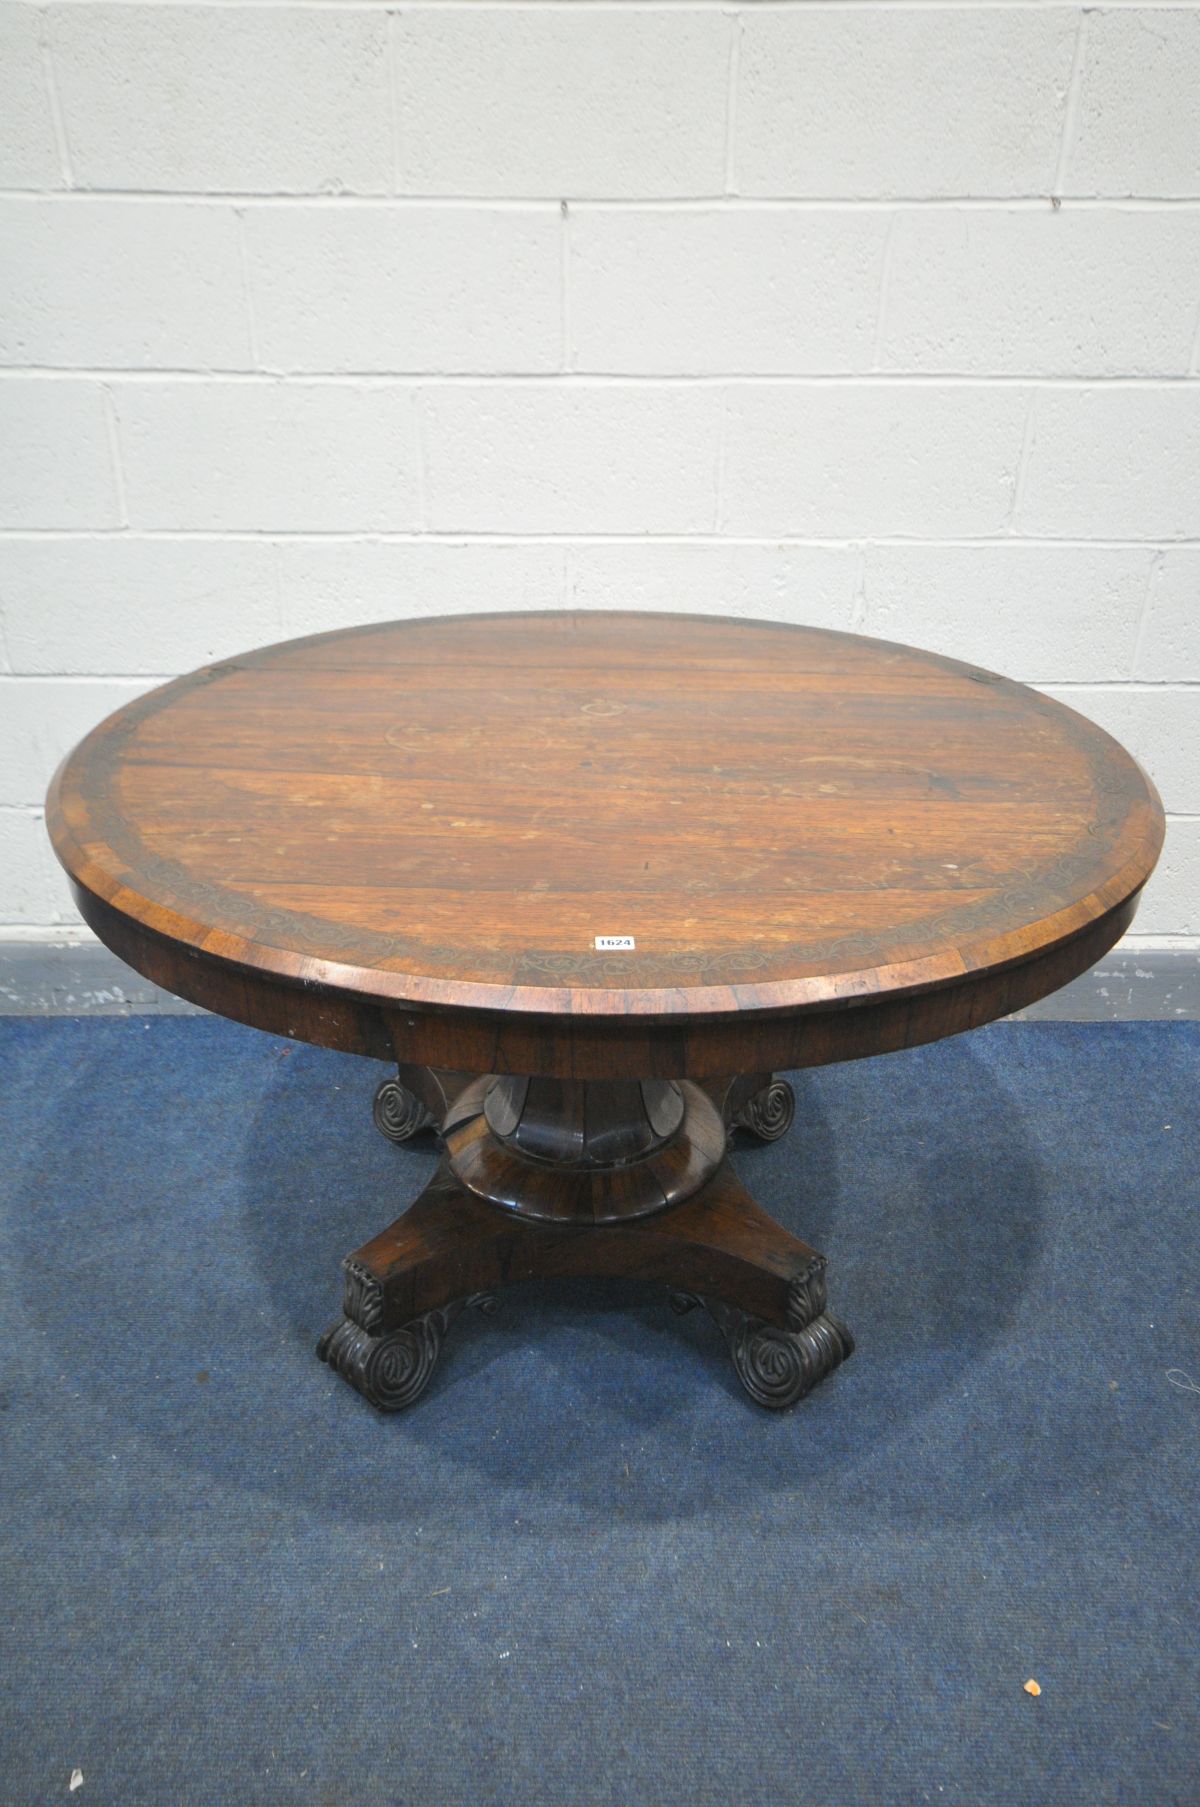 A GEORGE IV ROSEWOOD BREAKFAST TABLE, the circular tilt-top with a foliate brass inlaid border, on a